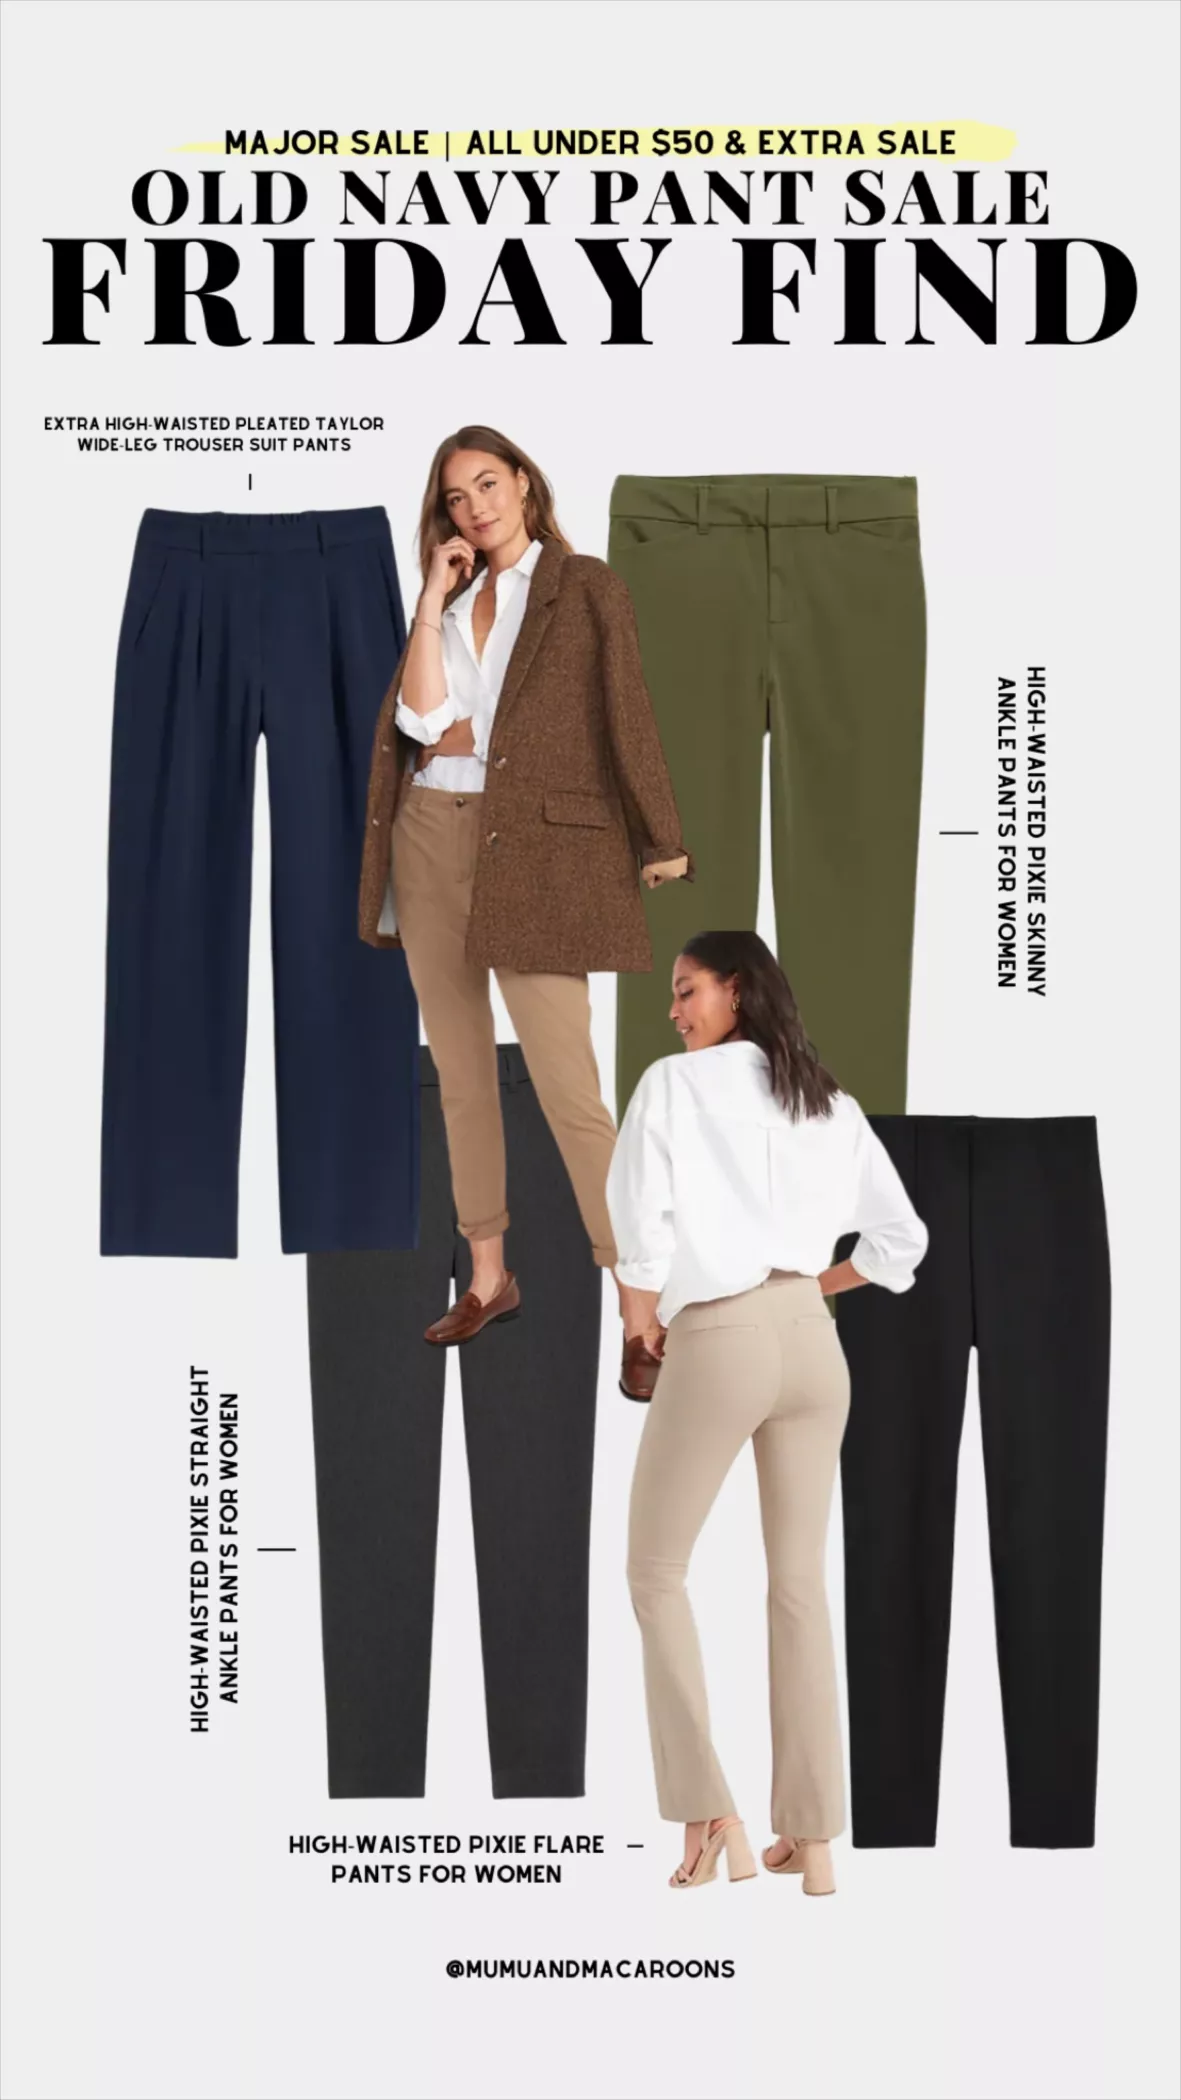 OLDNAVY HIGH- WAISTED PIXIE FLARE PANTS FOR WOMEN